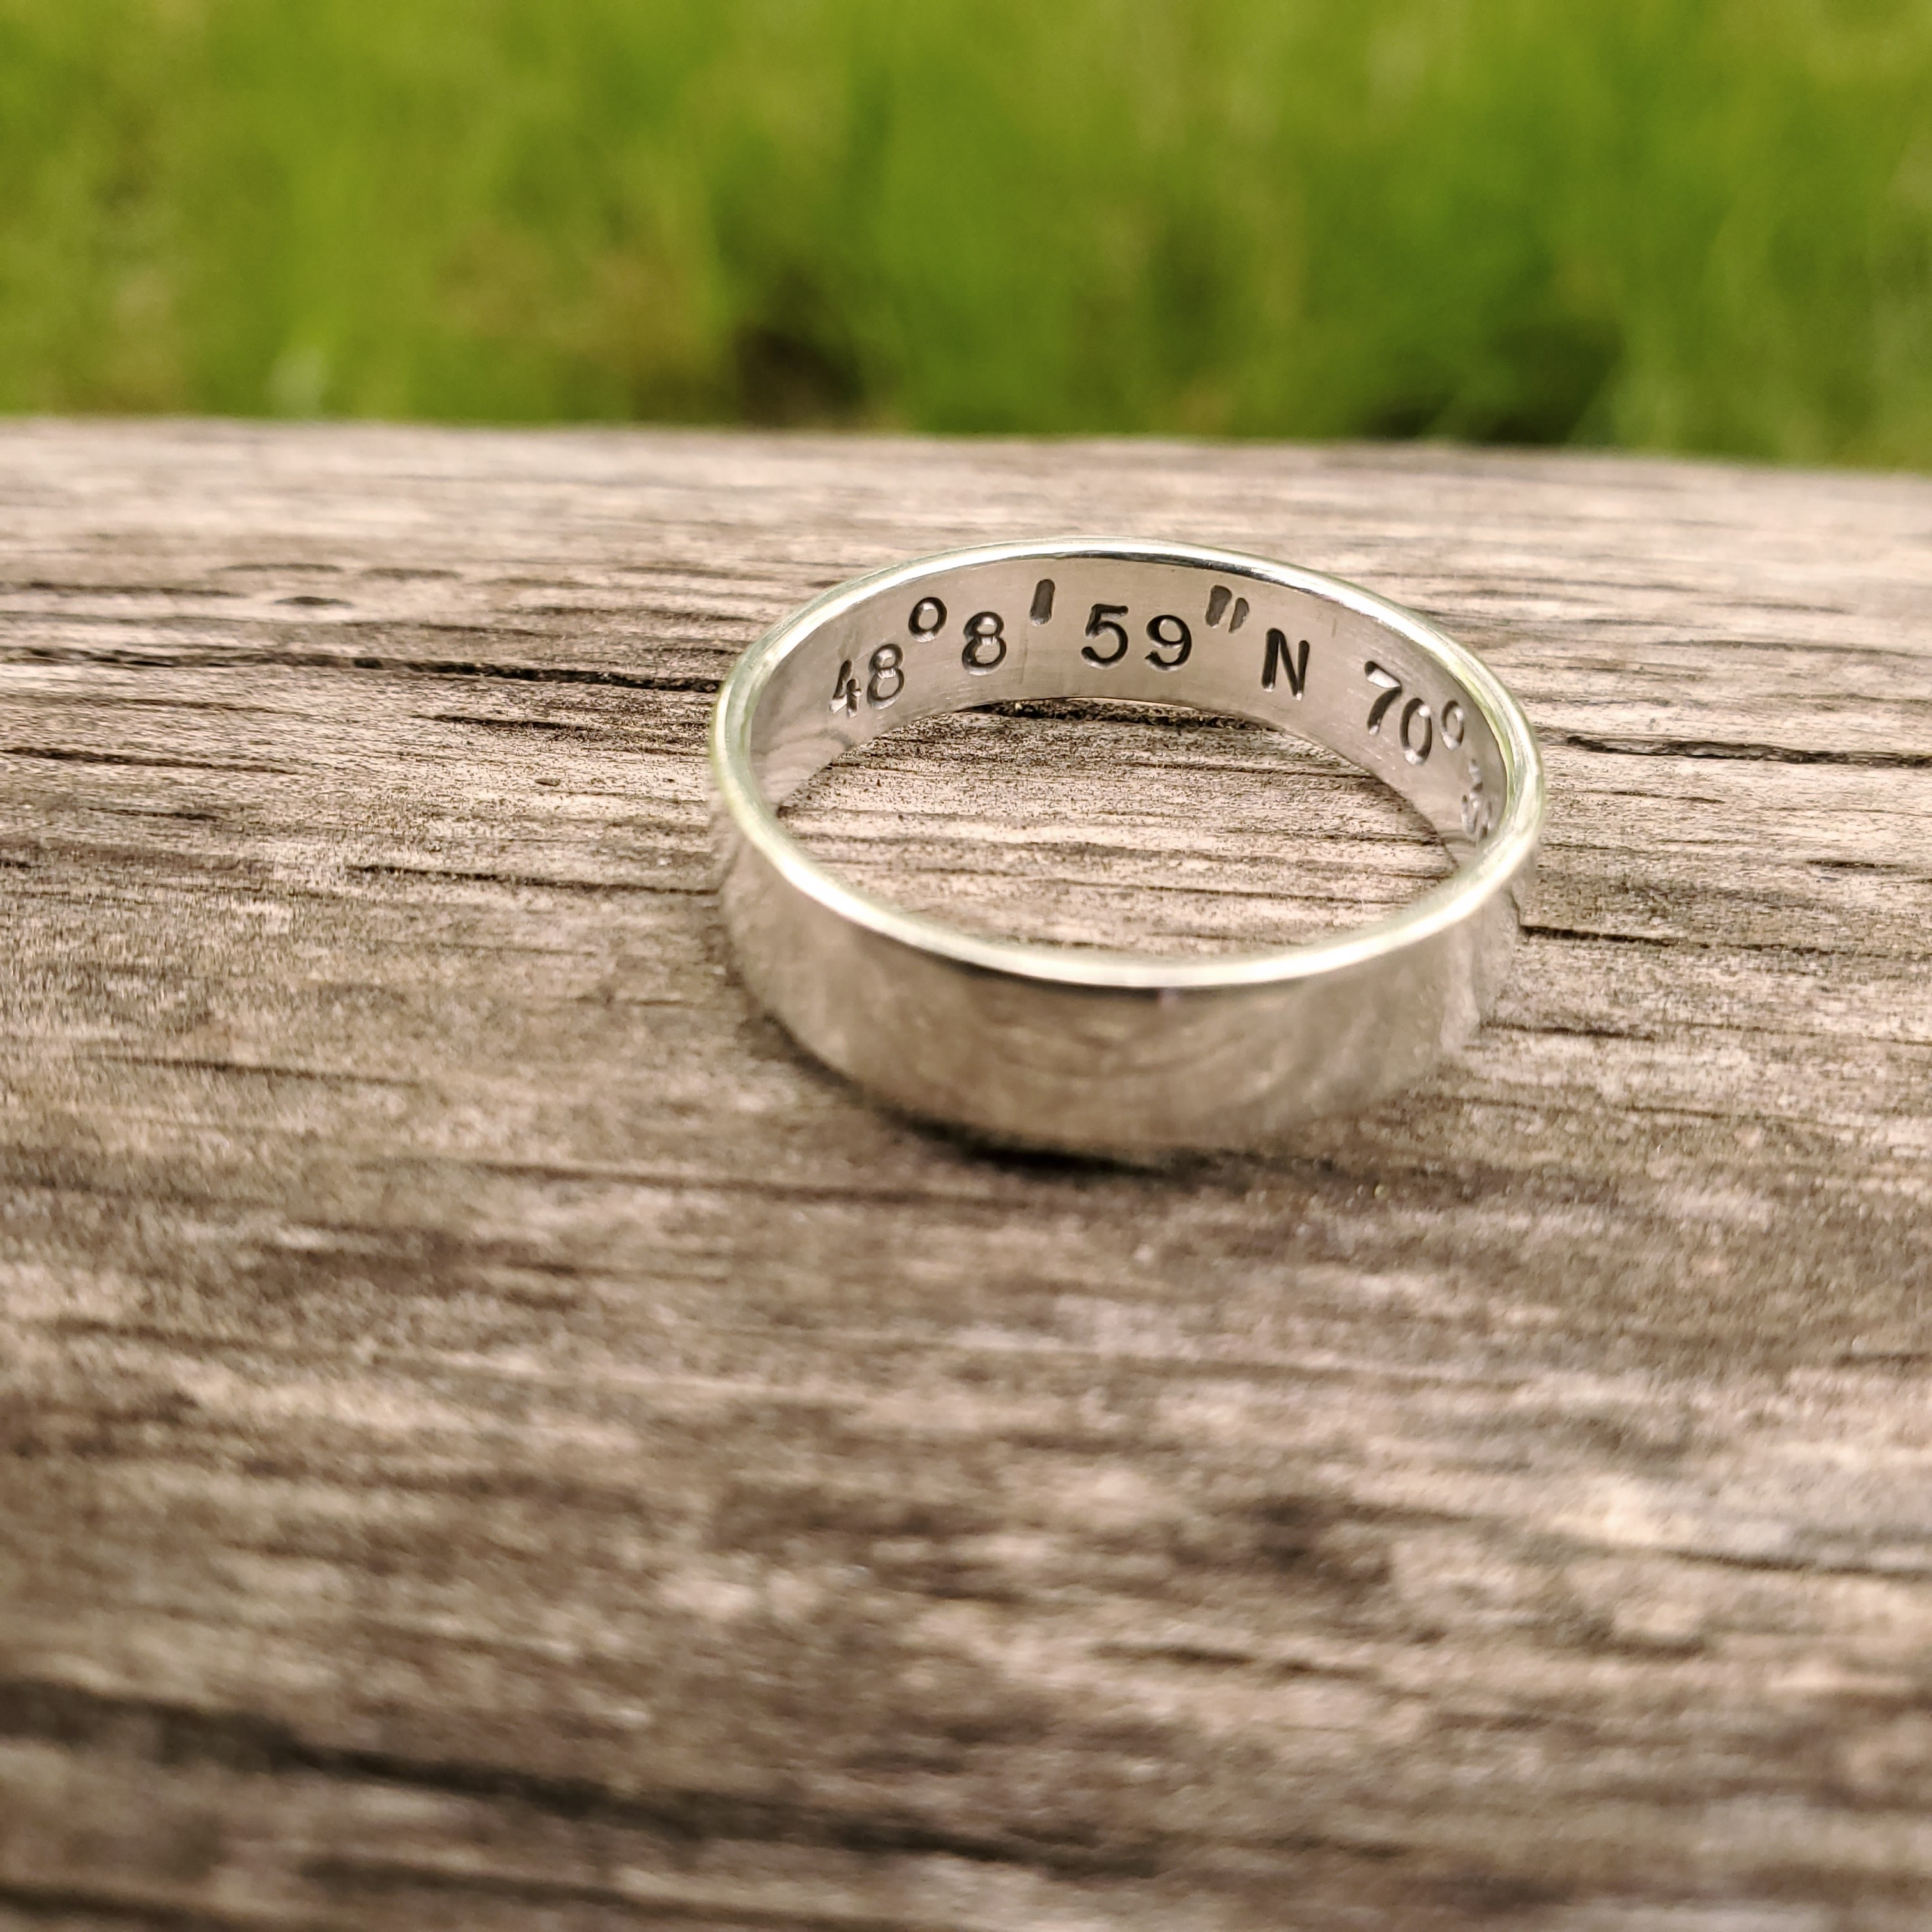 Silver ring with coordinates stamped on the inside